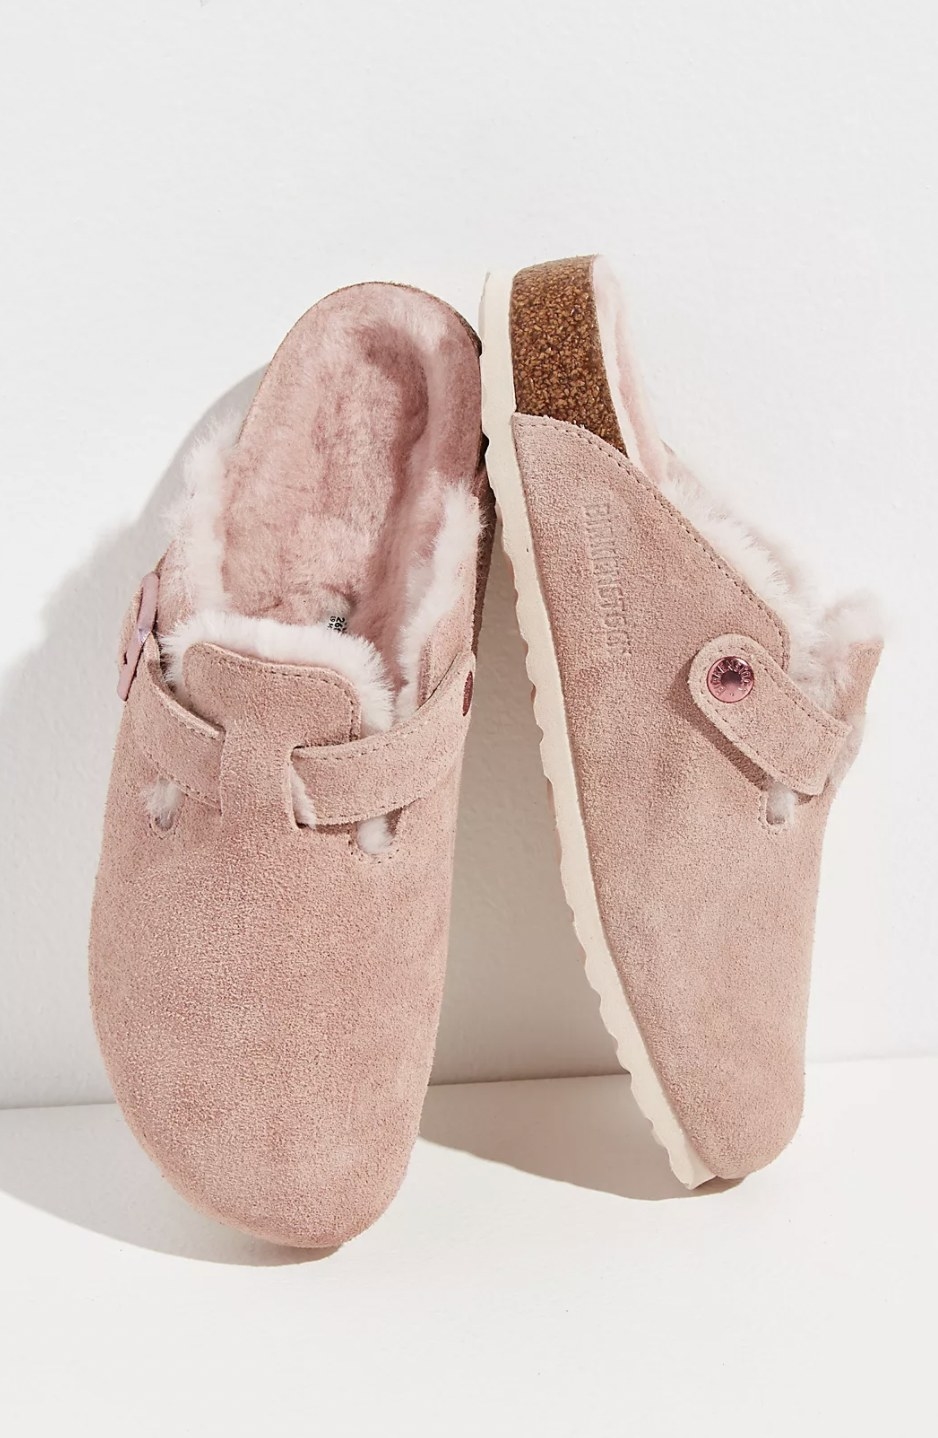 The pink shearling clogs